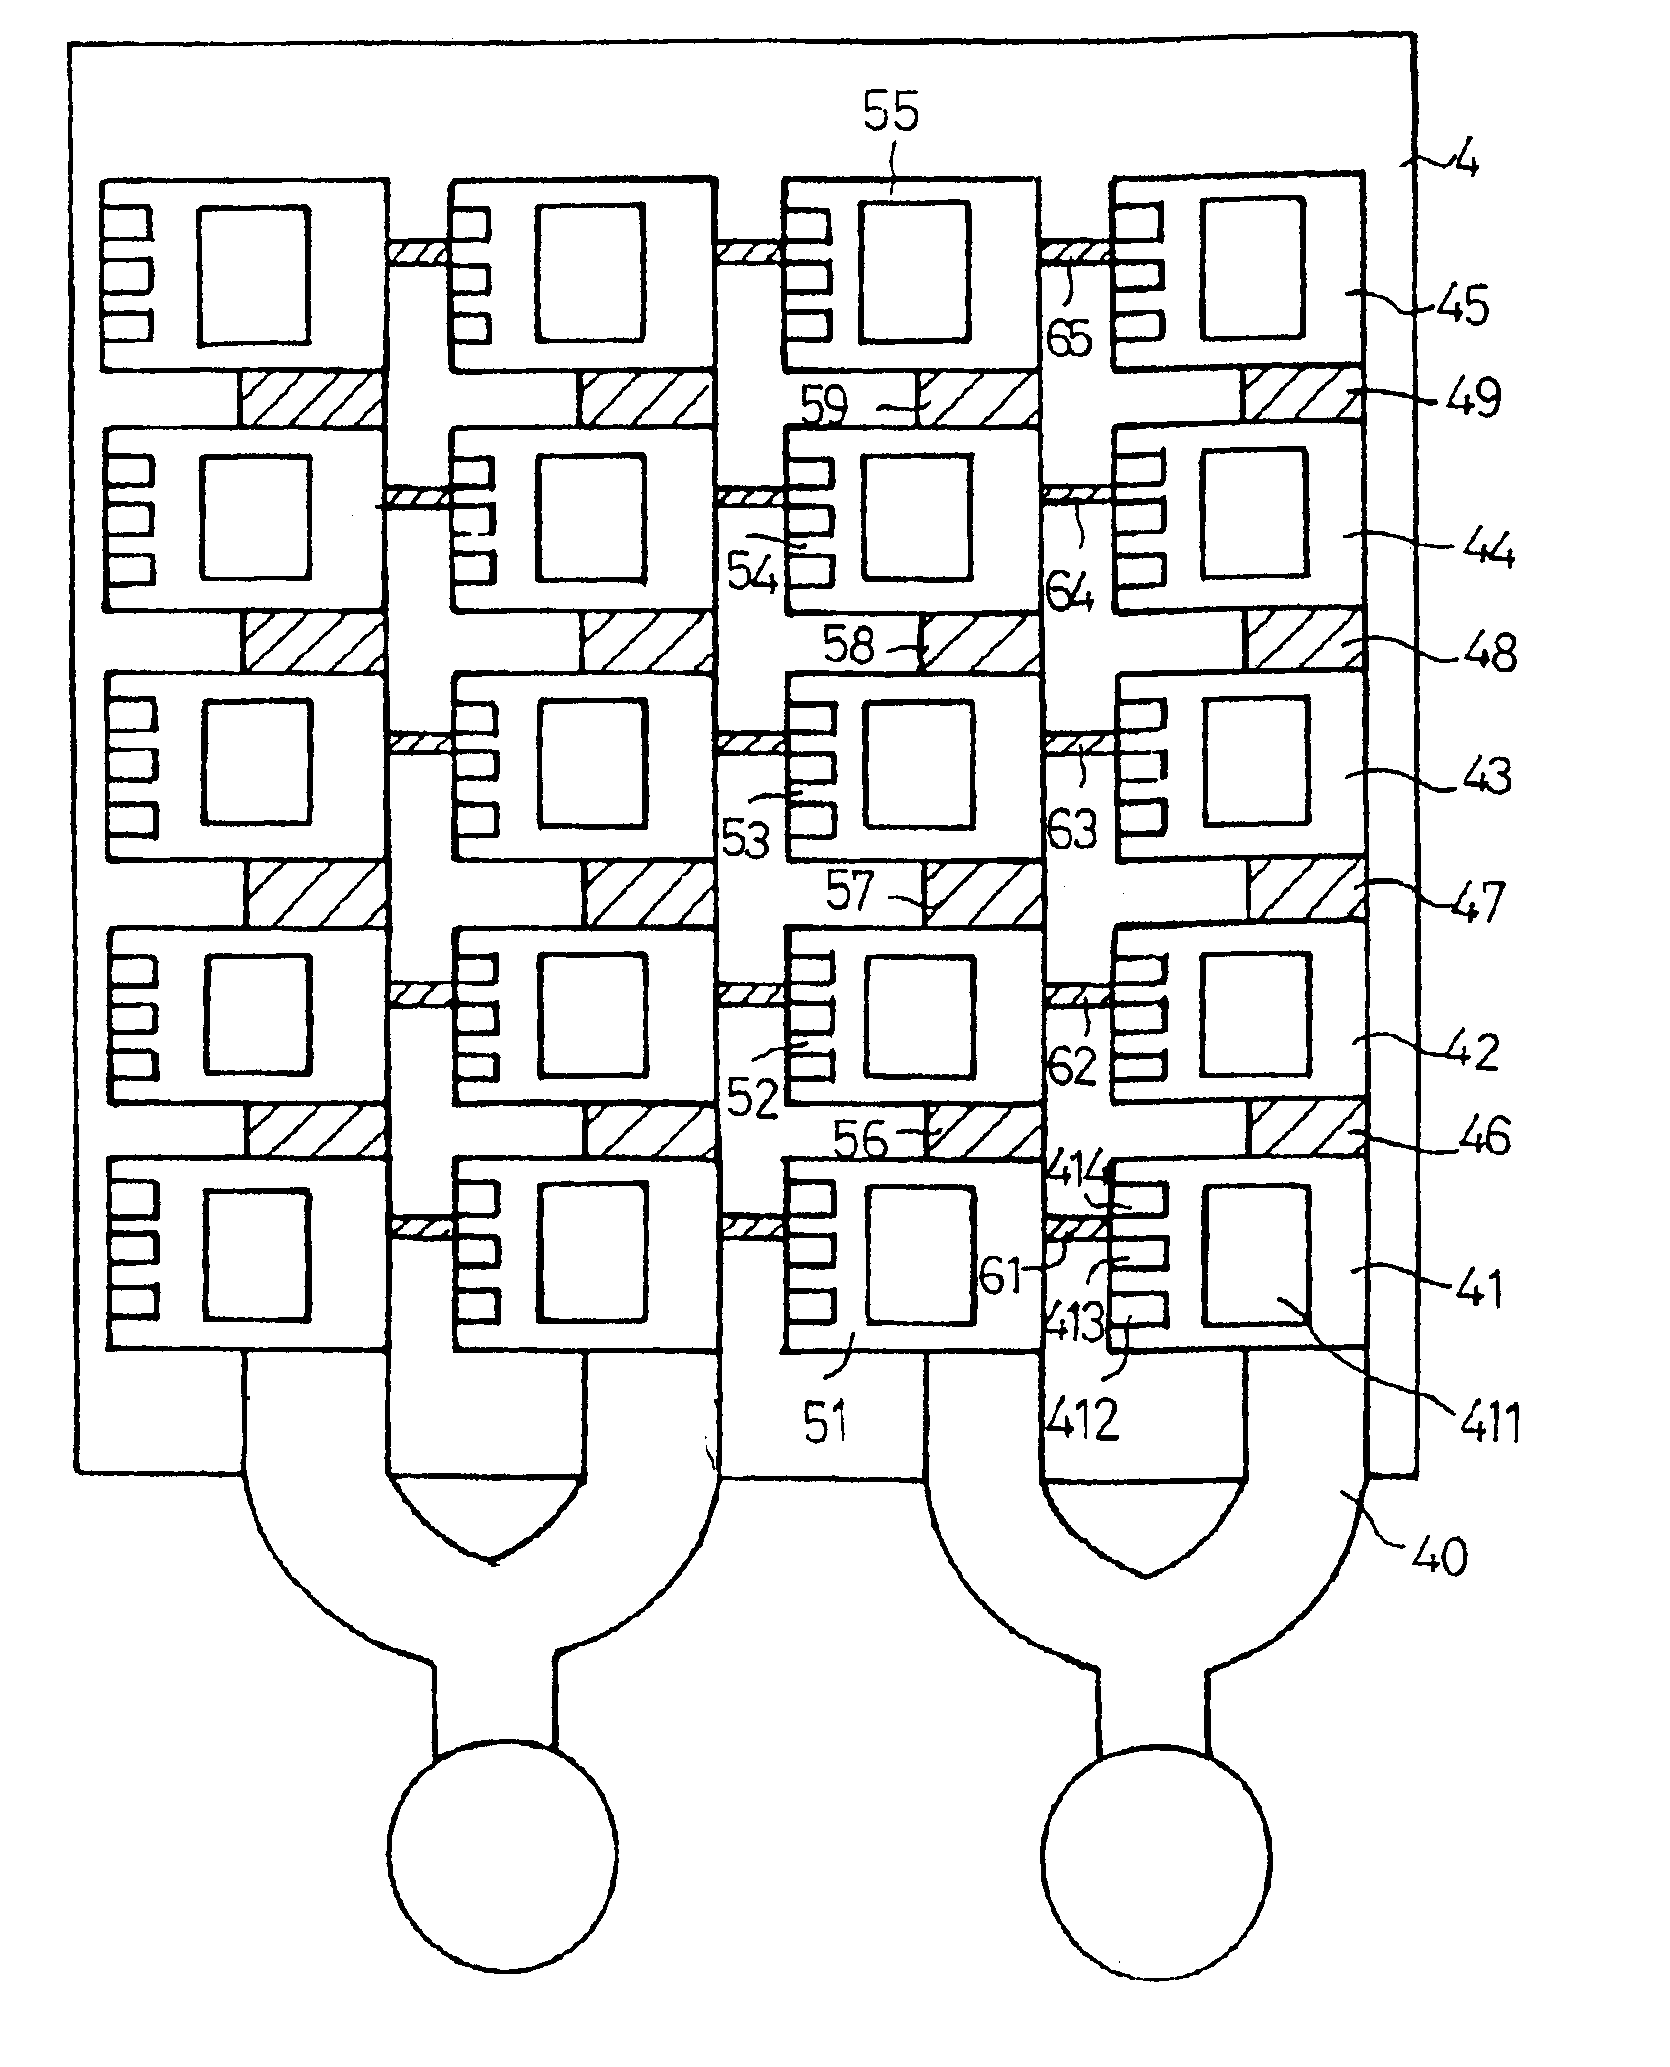 Encapsulation method and leadframe for leadless semiconductor packages